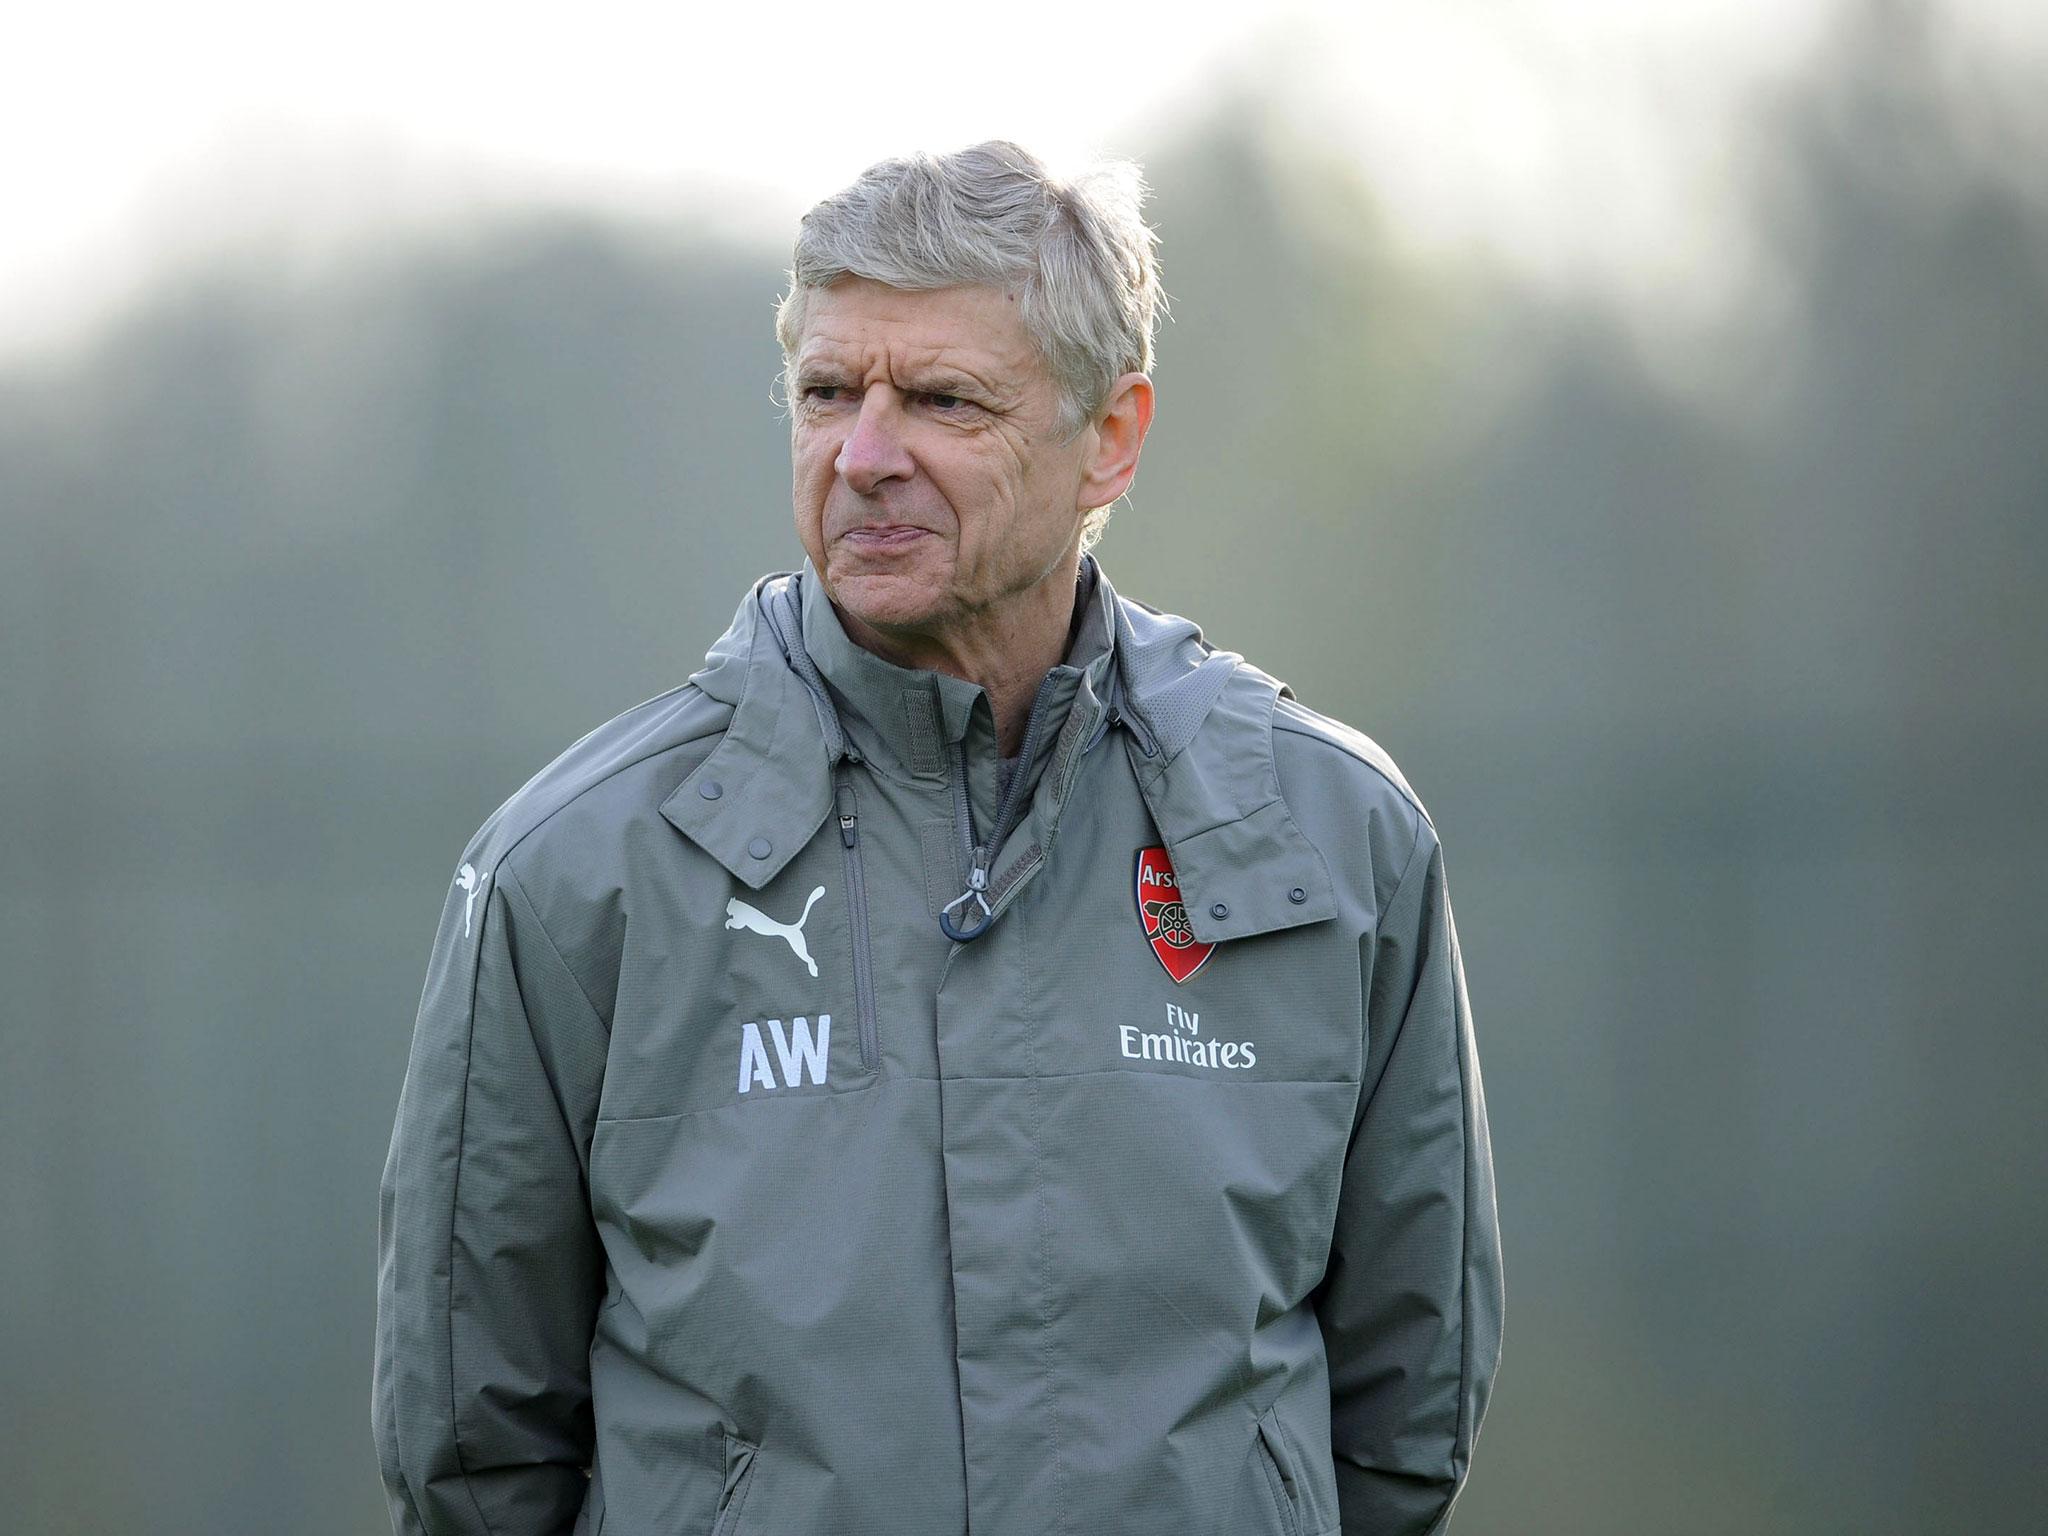 Wenger's side have two big games this week against Everton and Manchester City